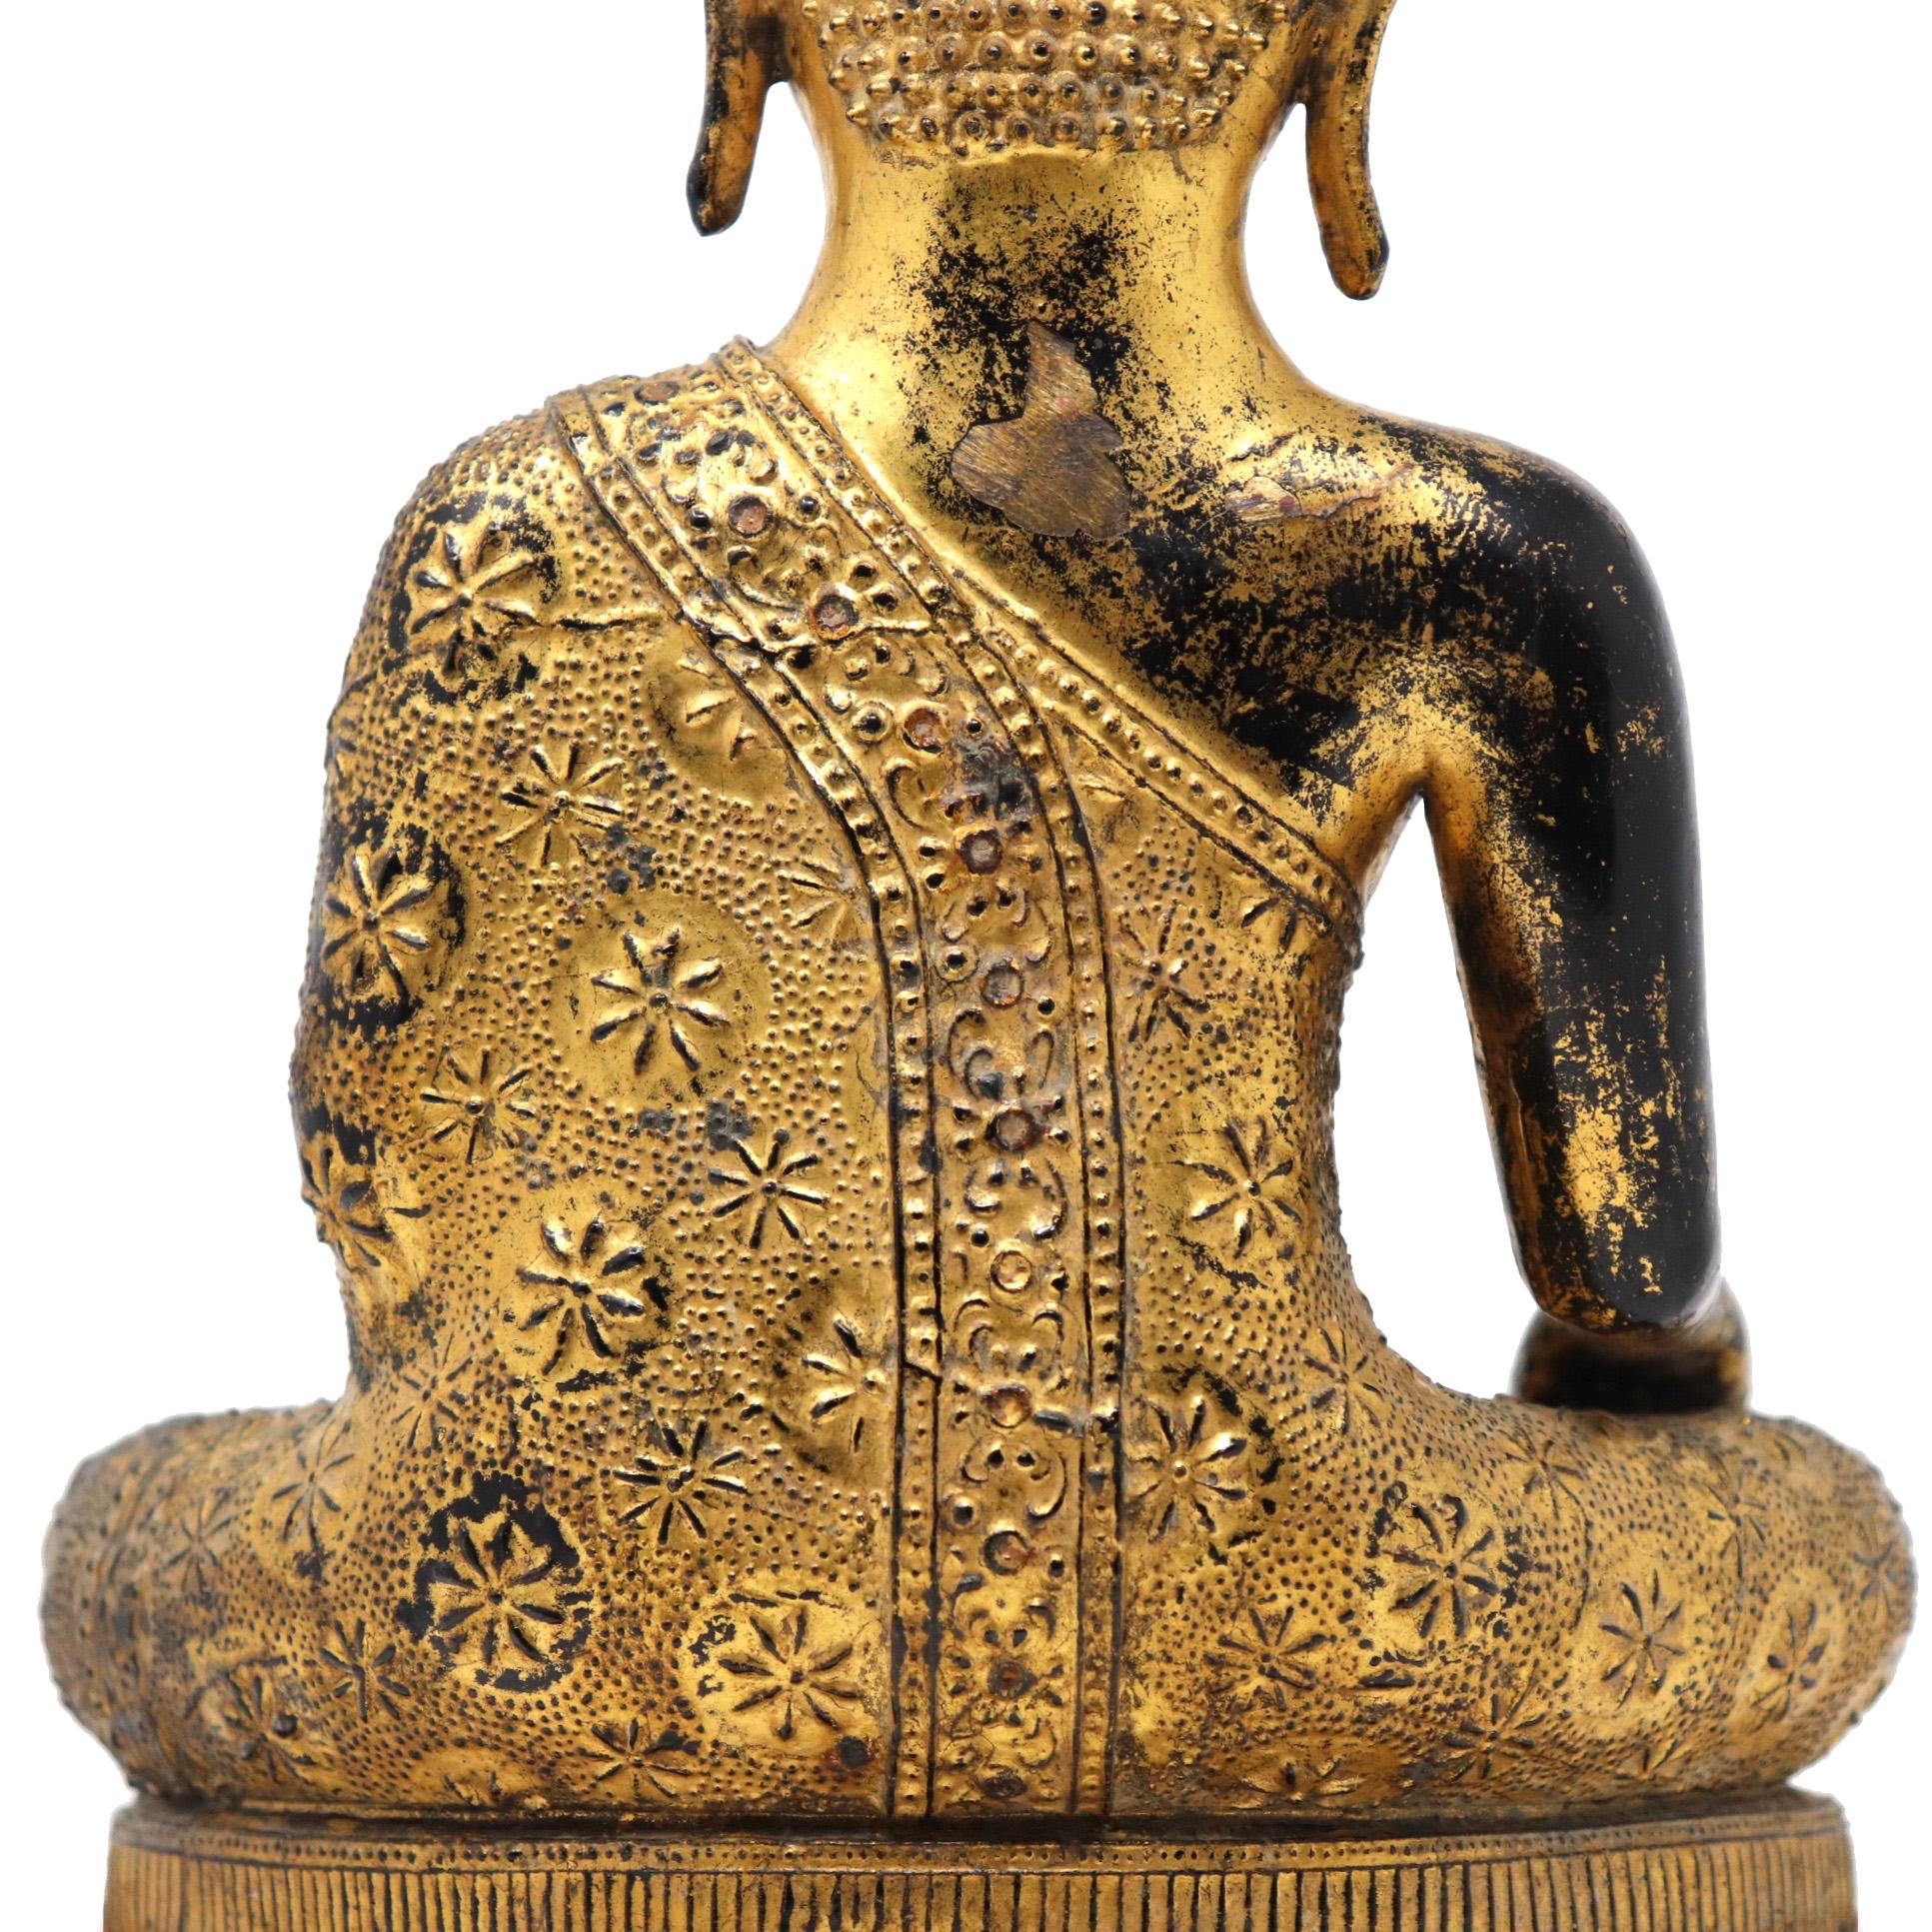 Thai Gilt Bronze Seated Earth Touching Buddha Figure, Late 19th Century For Sale 8